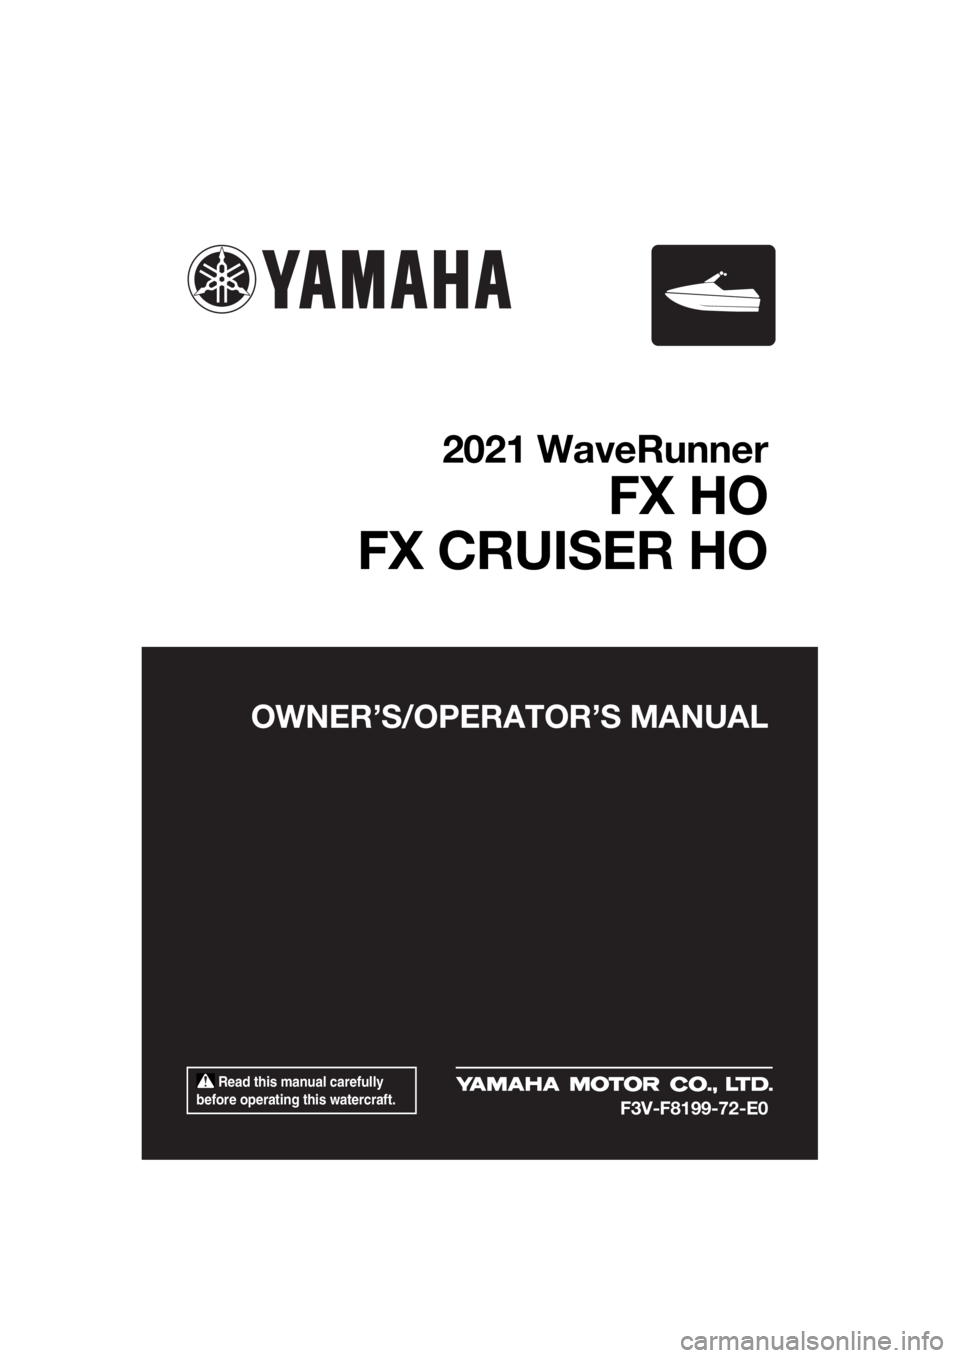 YAMAHA FX HO 2021  Owners Manual  Read this manual carefully 
before operating this watercraft.
OWNER’S/OPERAT OR’S MANUAL
2021 WaveRunner
FX HO
FX CRUISER HO
F3V-F8199-72-E0
UF3V72E0.book  Page 1  Tuesday, June 16, 2020  2:29 PM